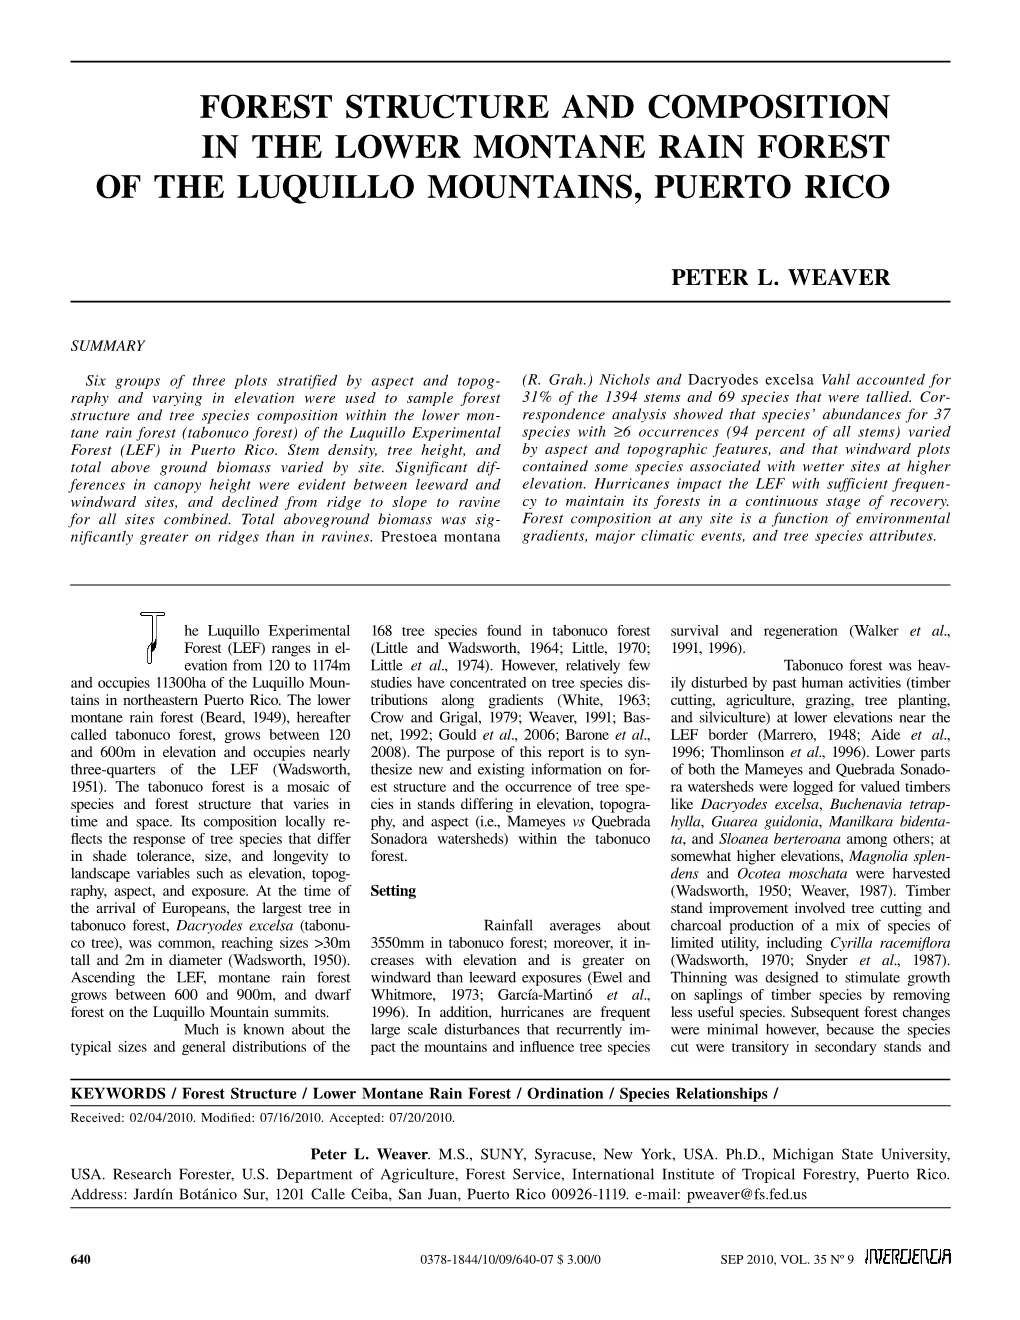 Forest Structure and Composition in the Lower Montane Rain Forest of the Luquillo Mountains, Puerto Rico